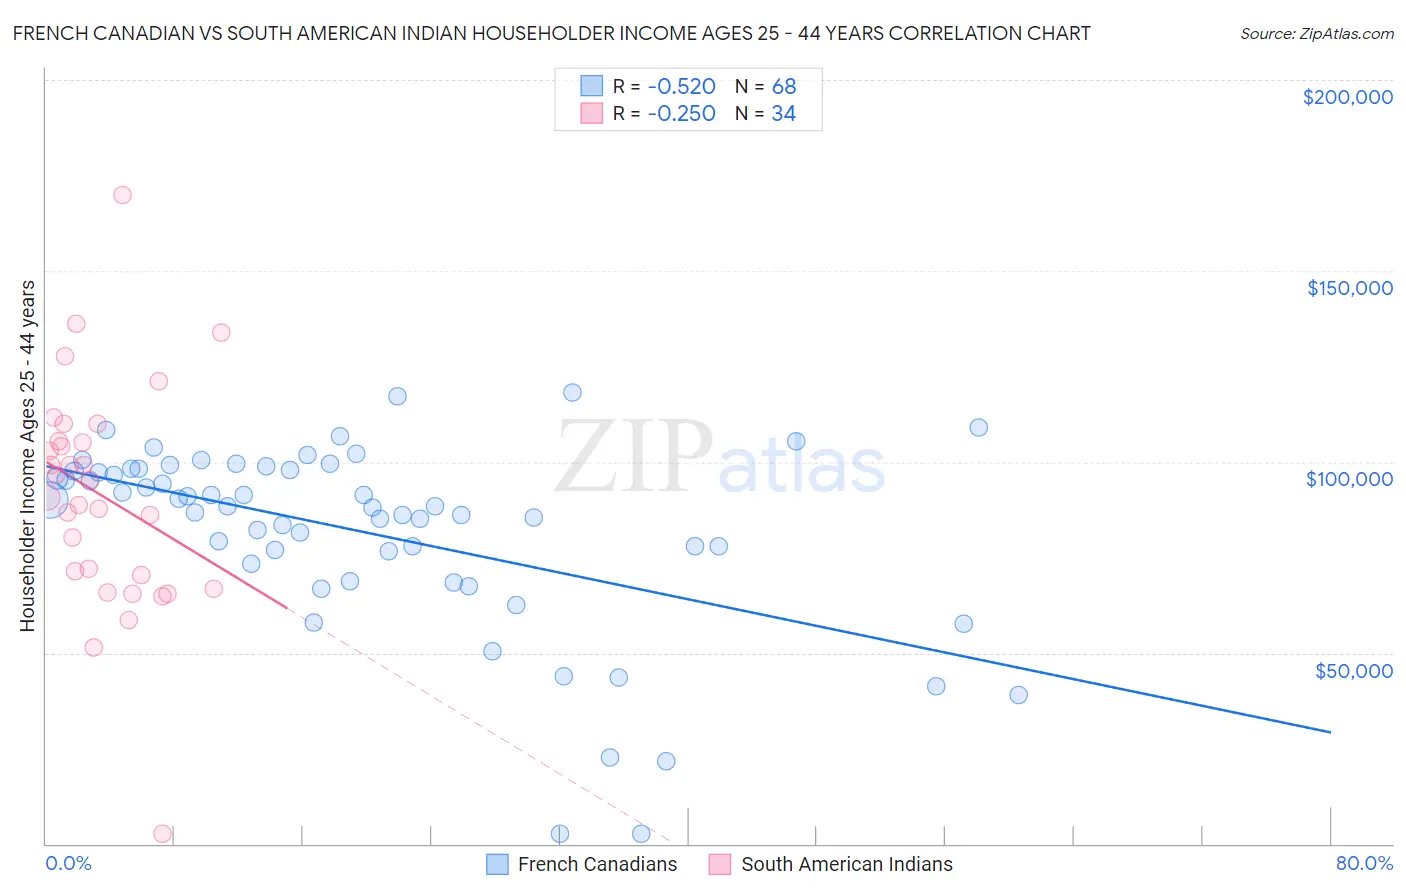 French Canadian vs South American Indian Householder Income Ages 25 - 44 years